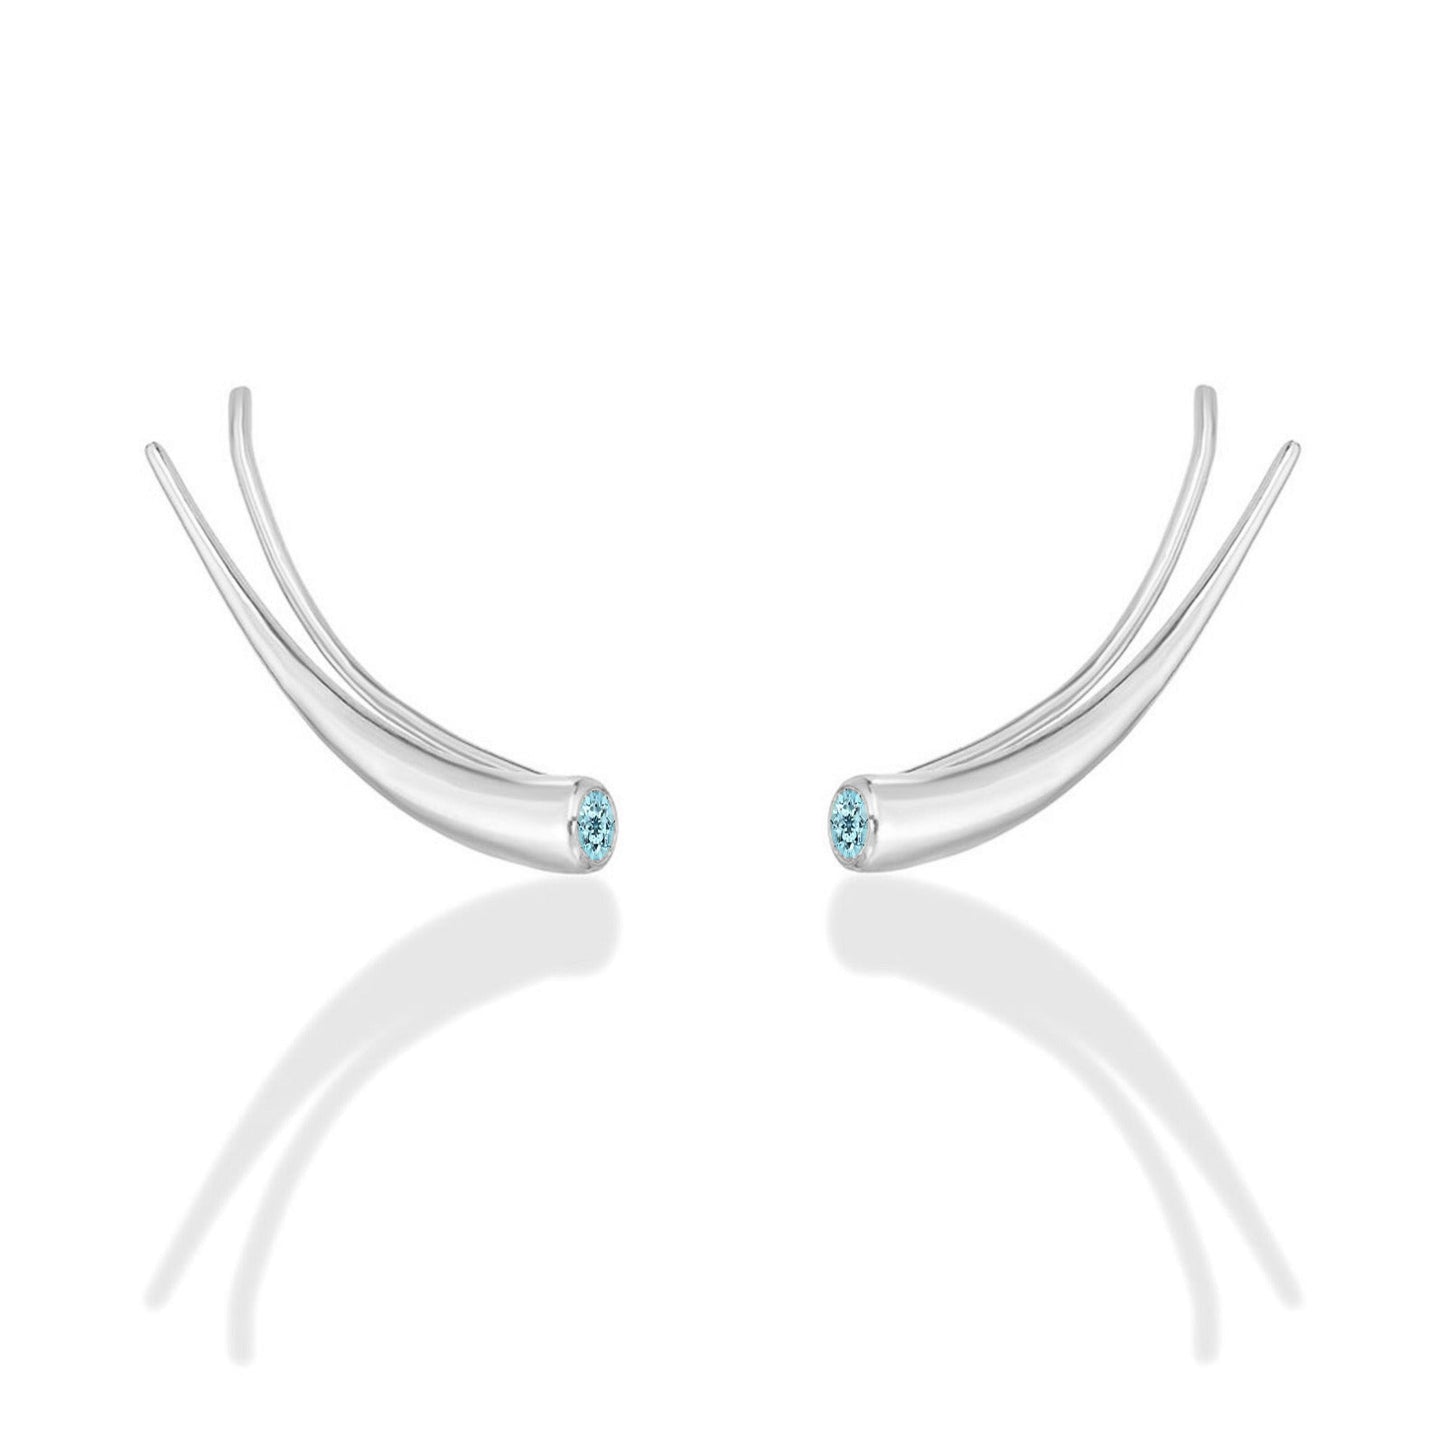 14k white gold Curved Quill Climber Earrings with aquamarine